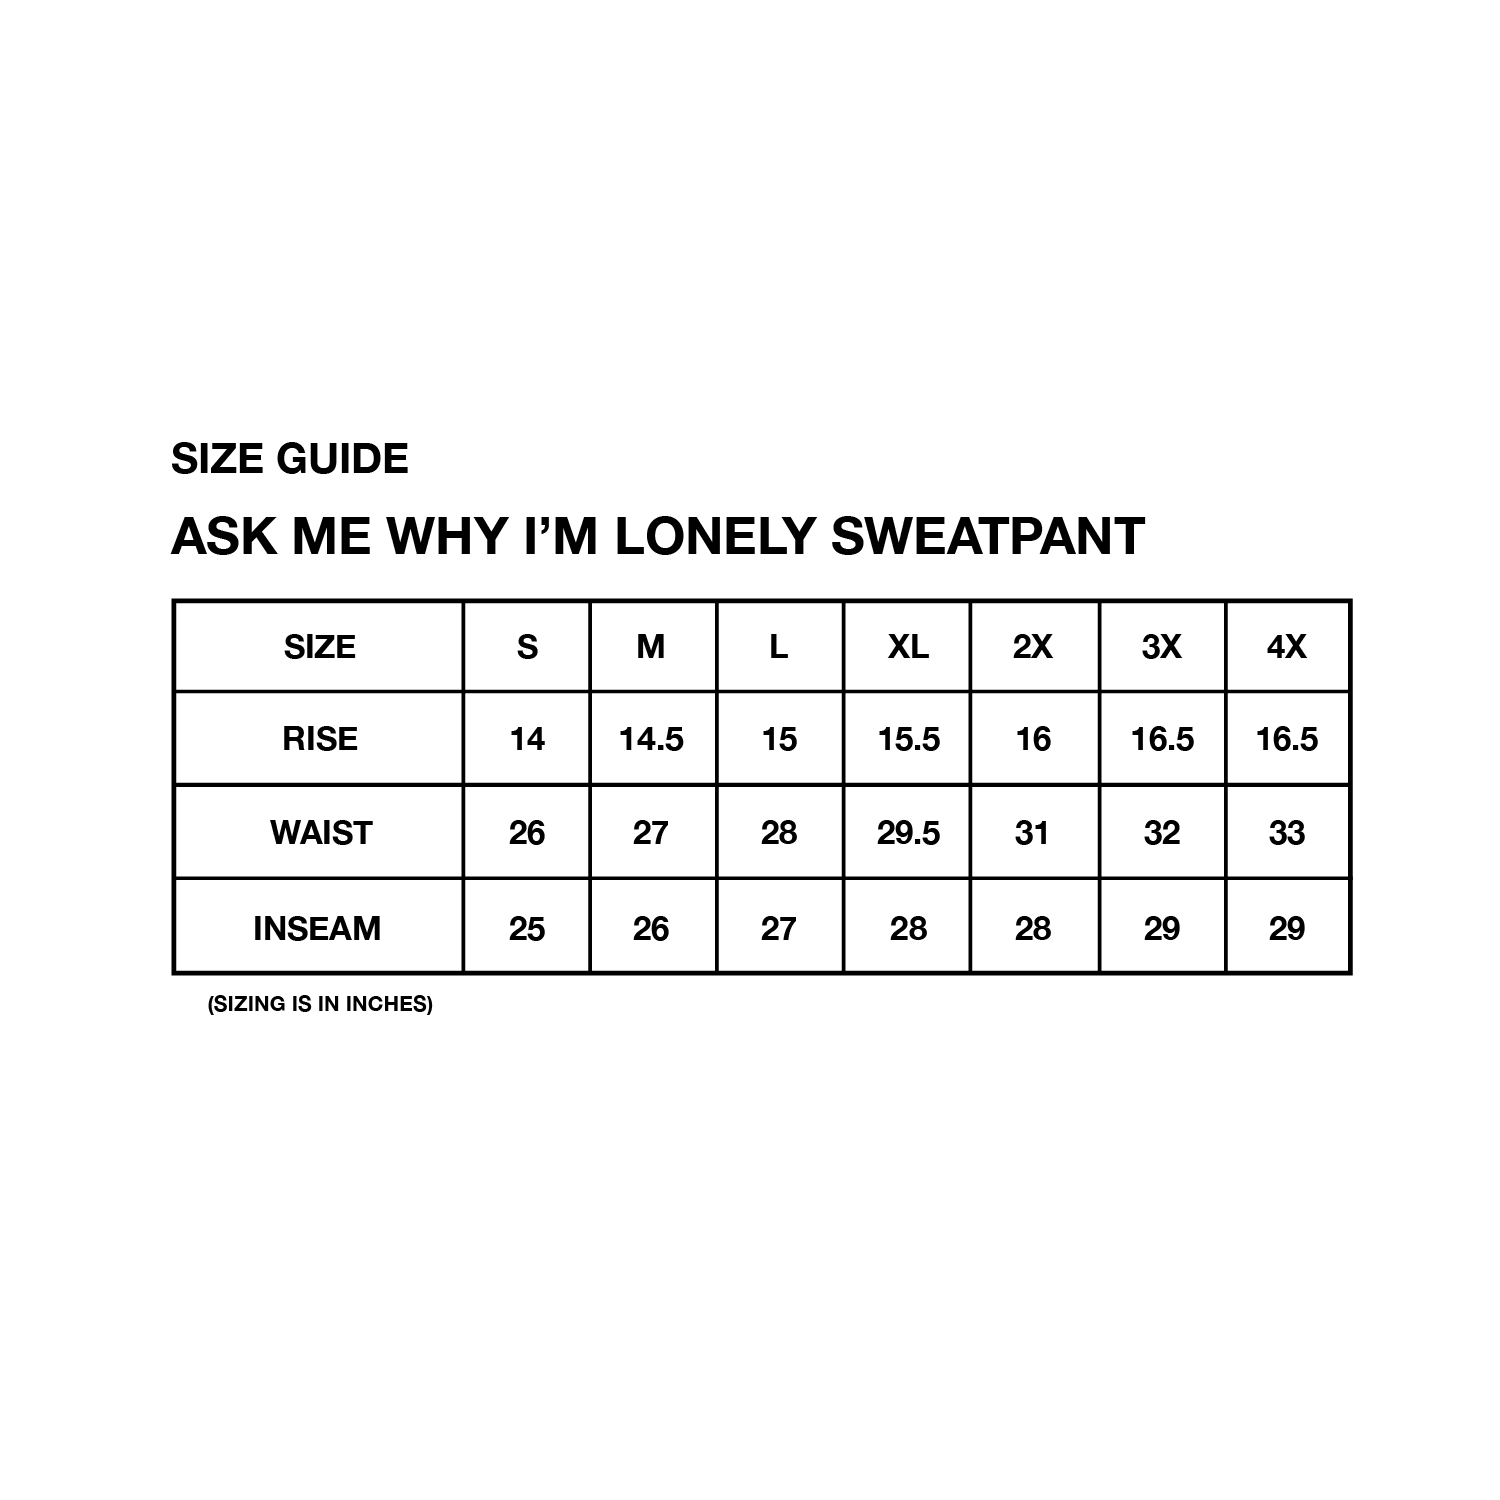 Ask Me Why I'm Lonely Heavyweight Sweatpants